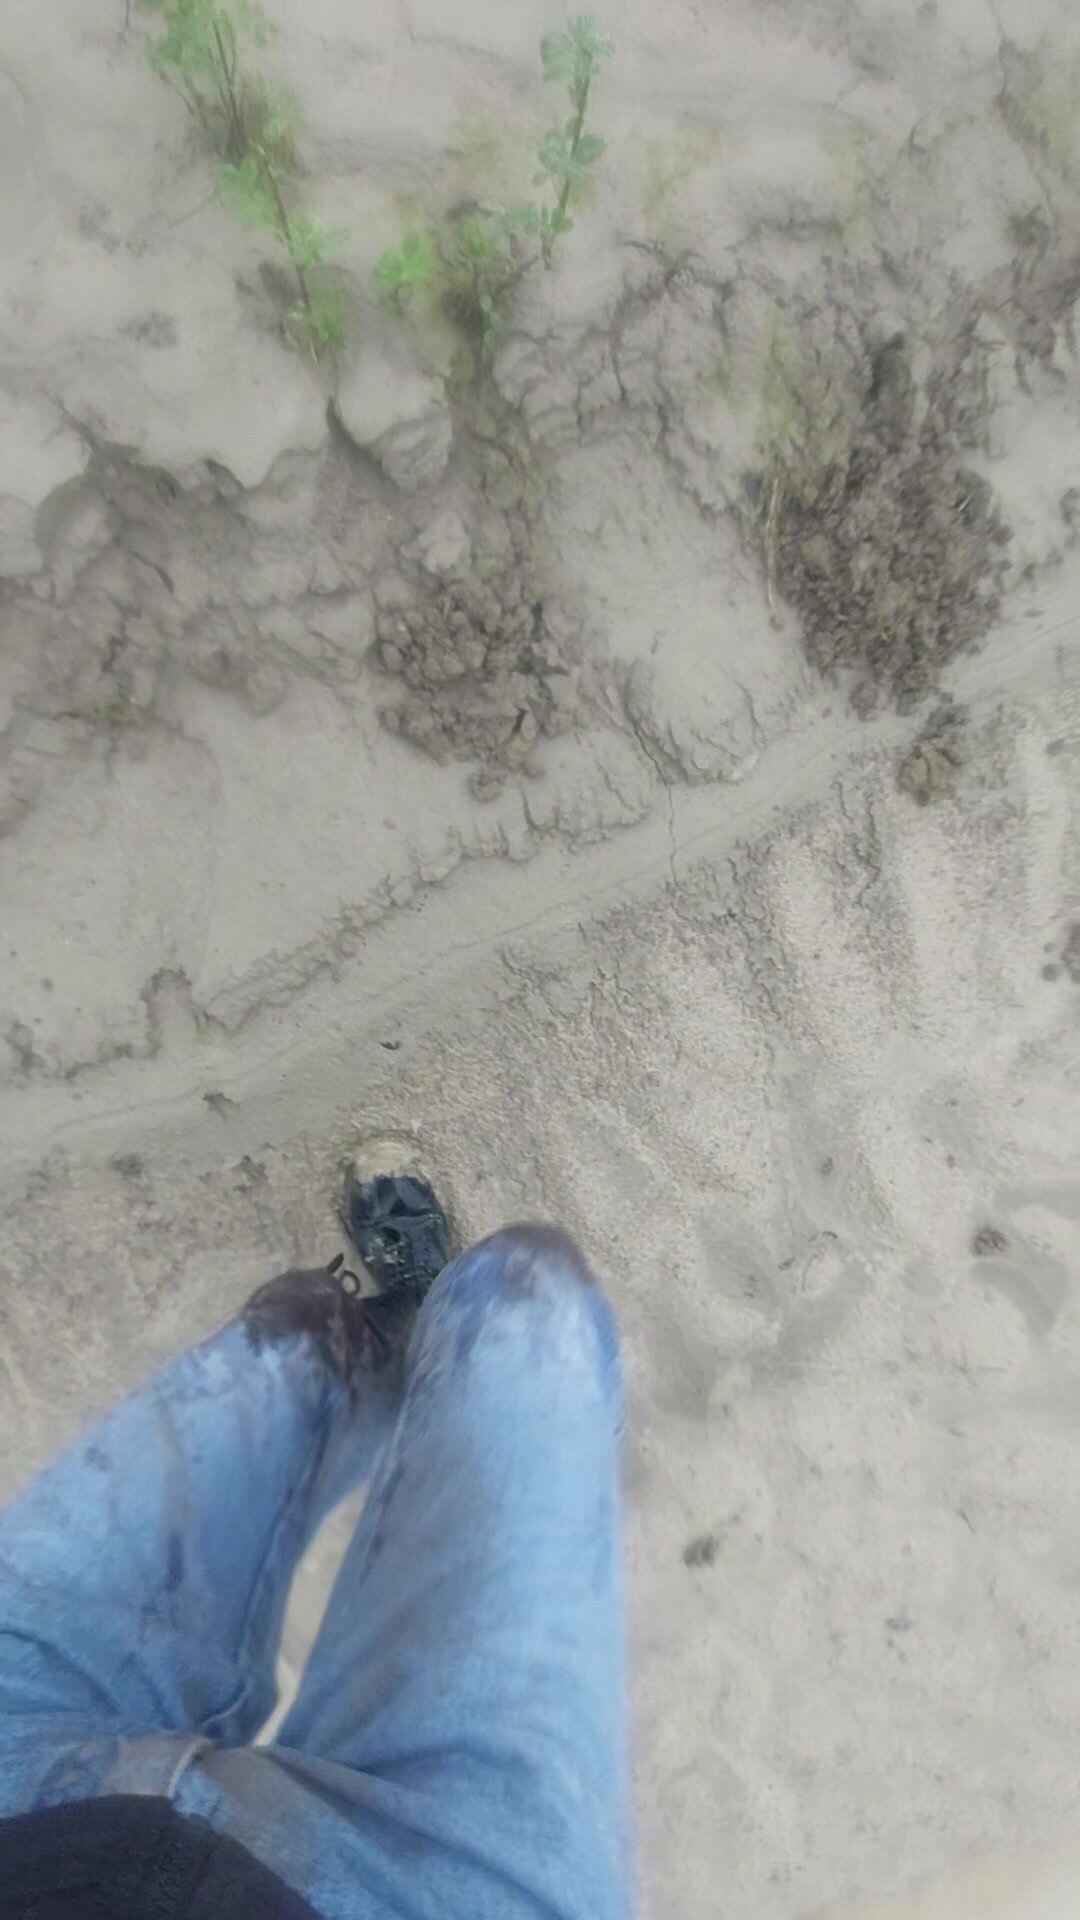 Boots in mud - video 9